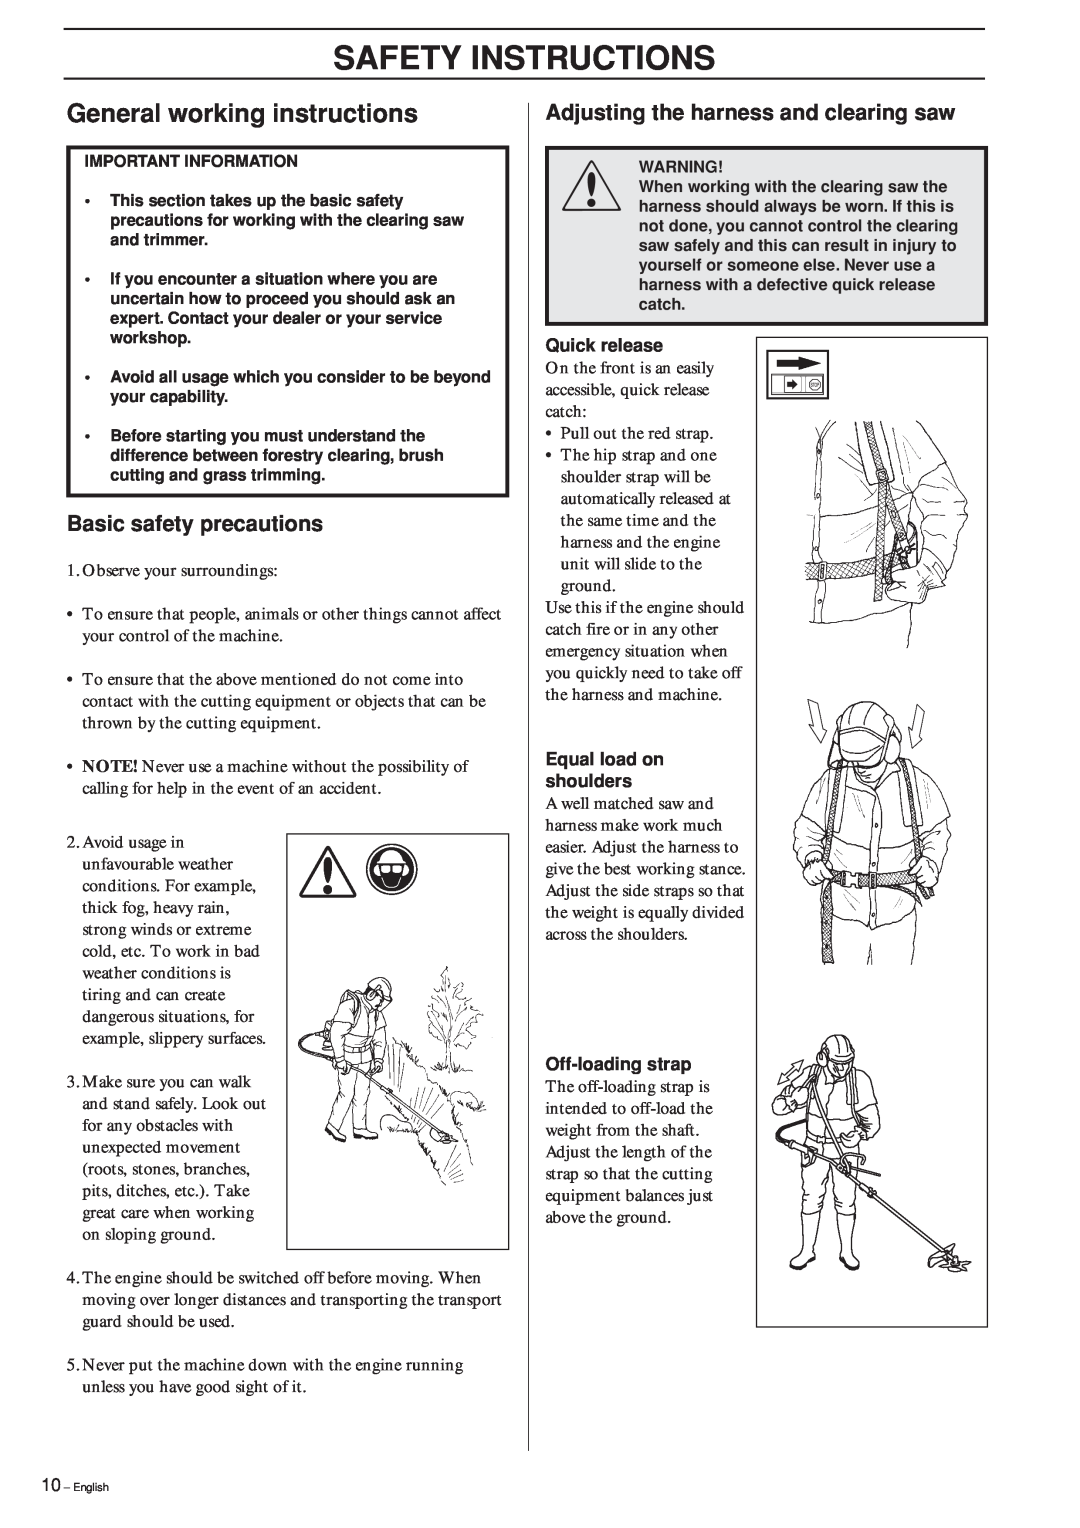 Husqvarna 240RBD manual General working instructions, Basic safety precautions, Adjusting the harness and clearing saw 